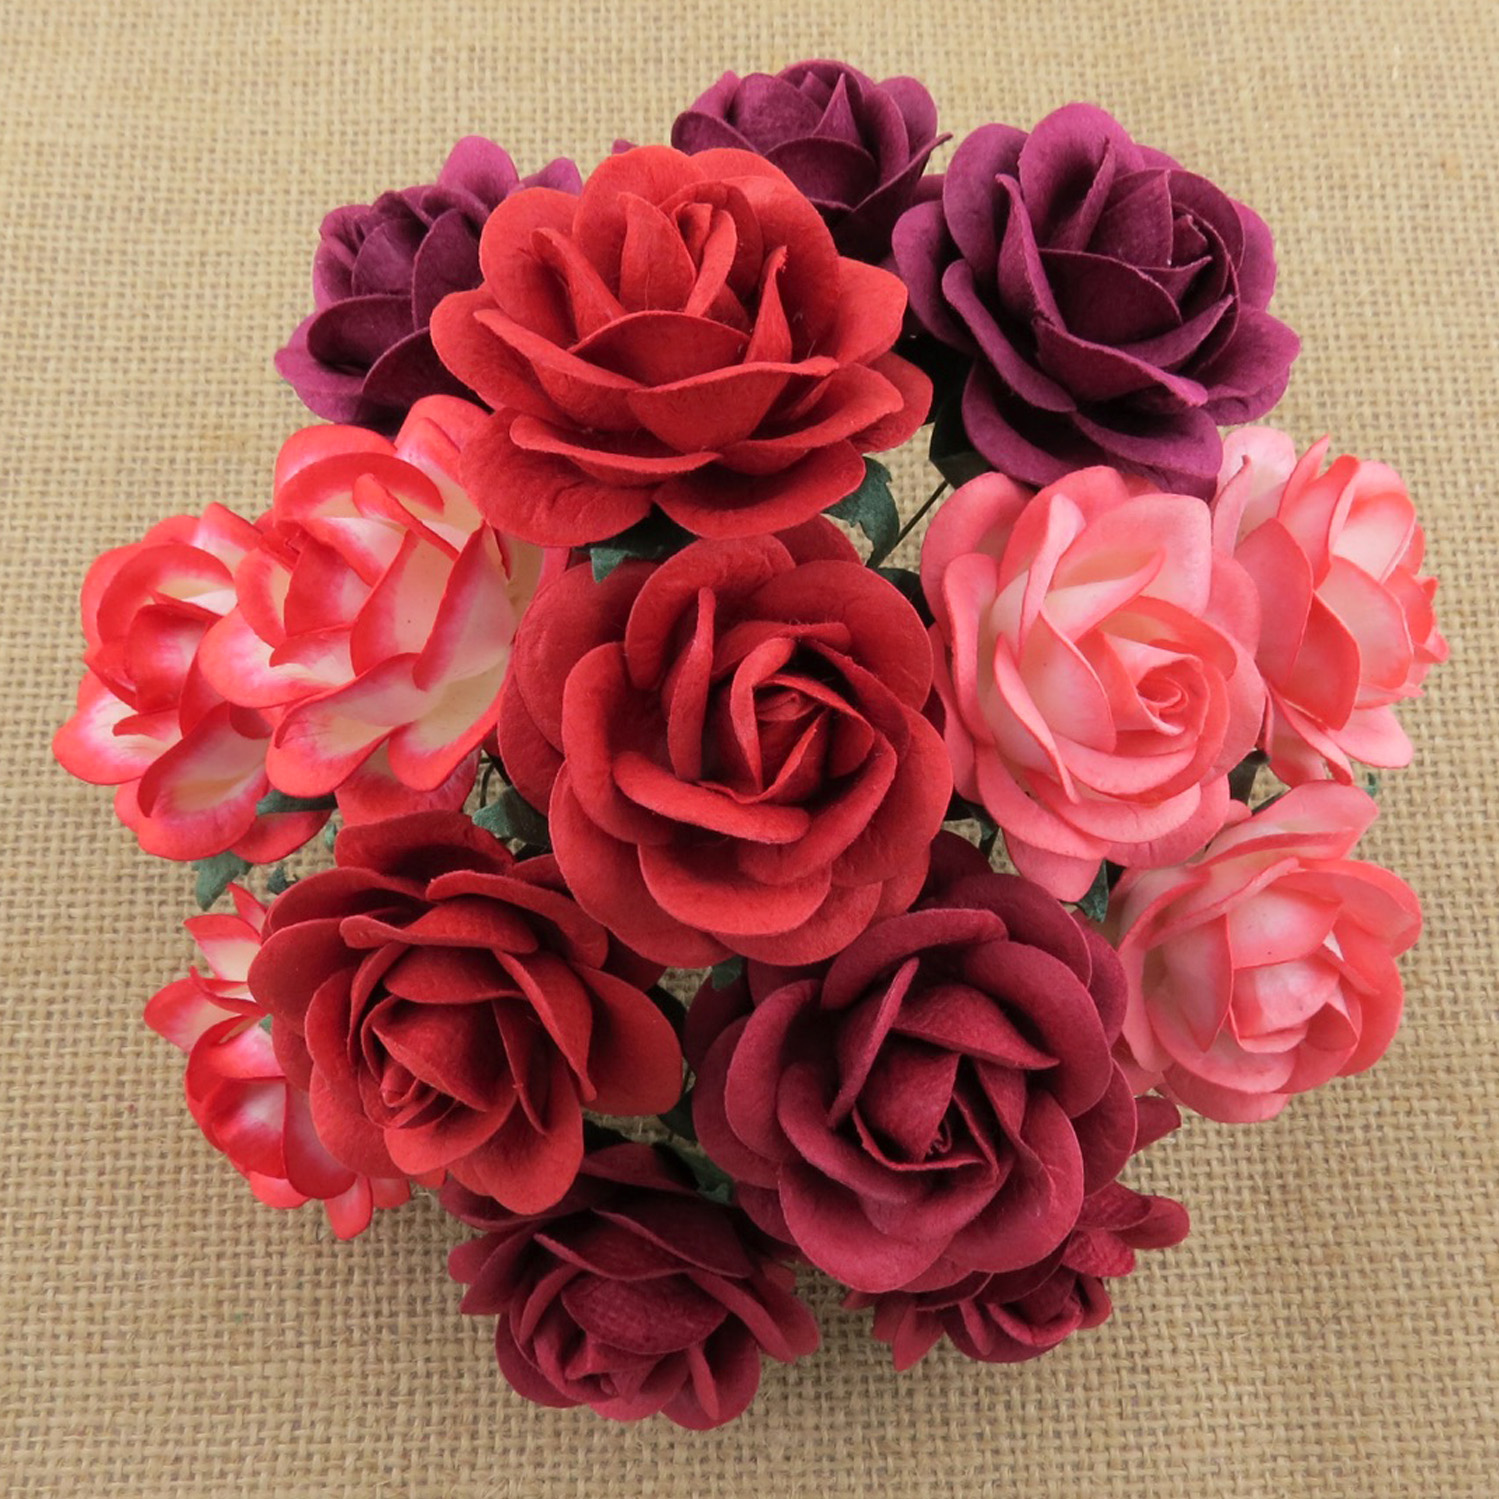 50 MIXED RED TONE MULBERRY PAPER TRELLIS ROSES - 5 COLOR